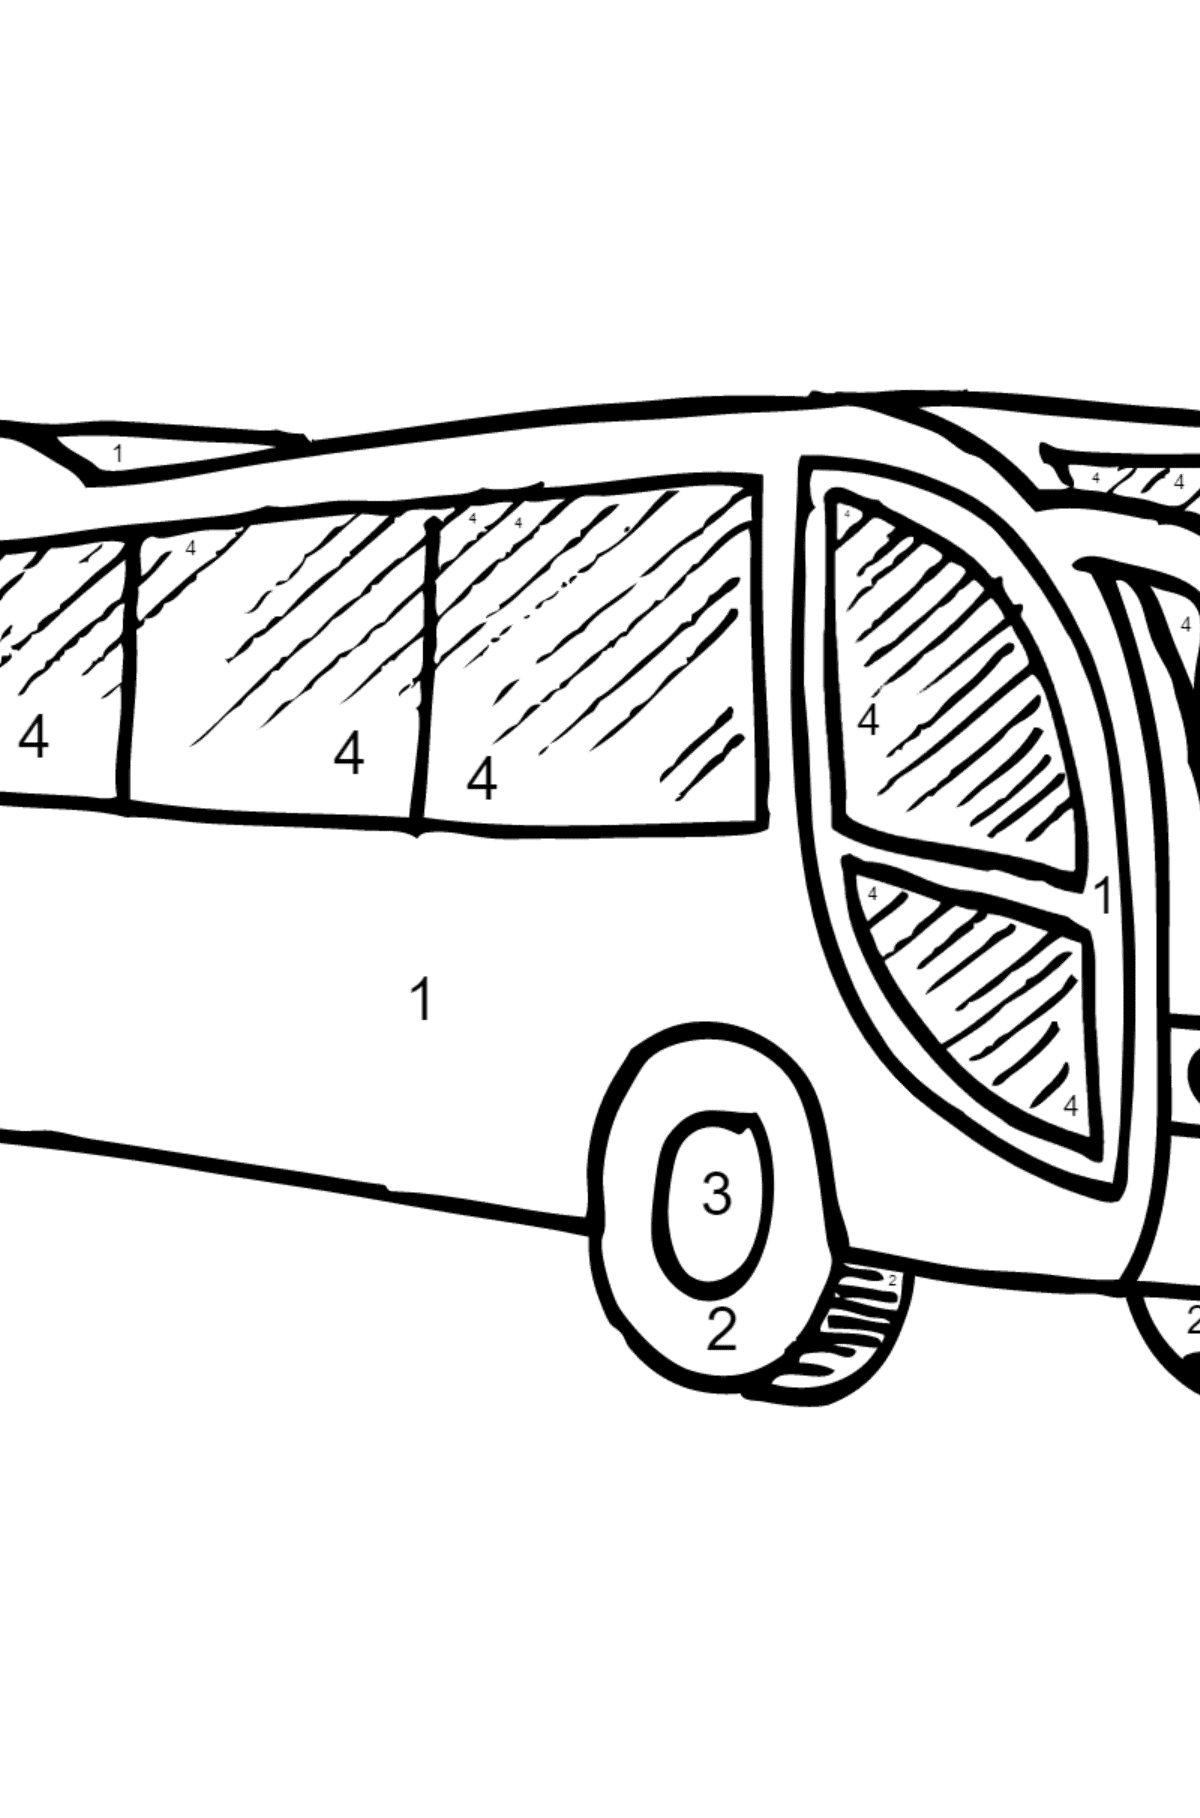 Coloring Page - A Bus is Having Rest - Coloring by Numbers for Kids